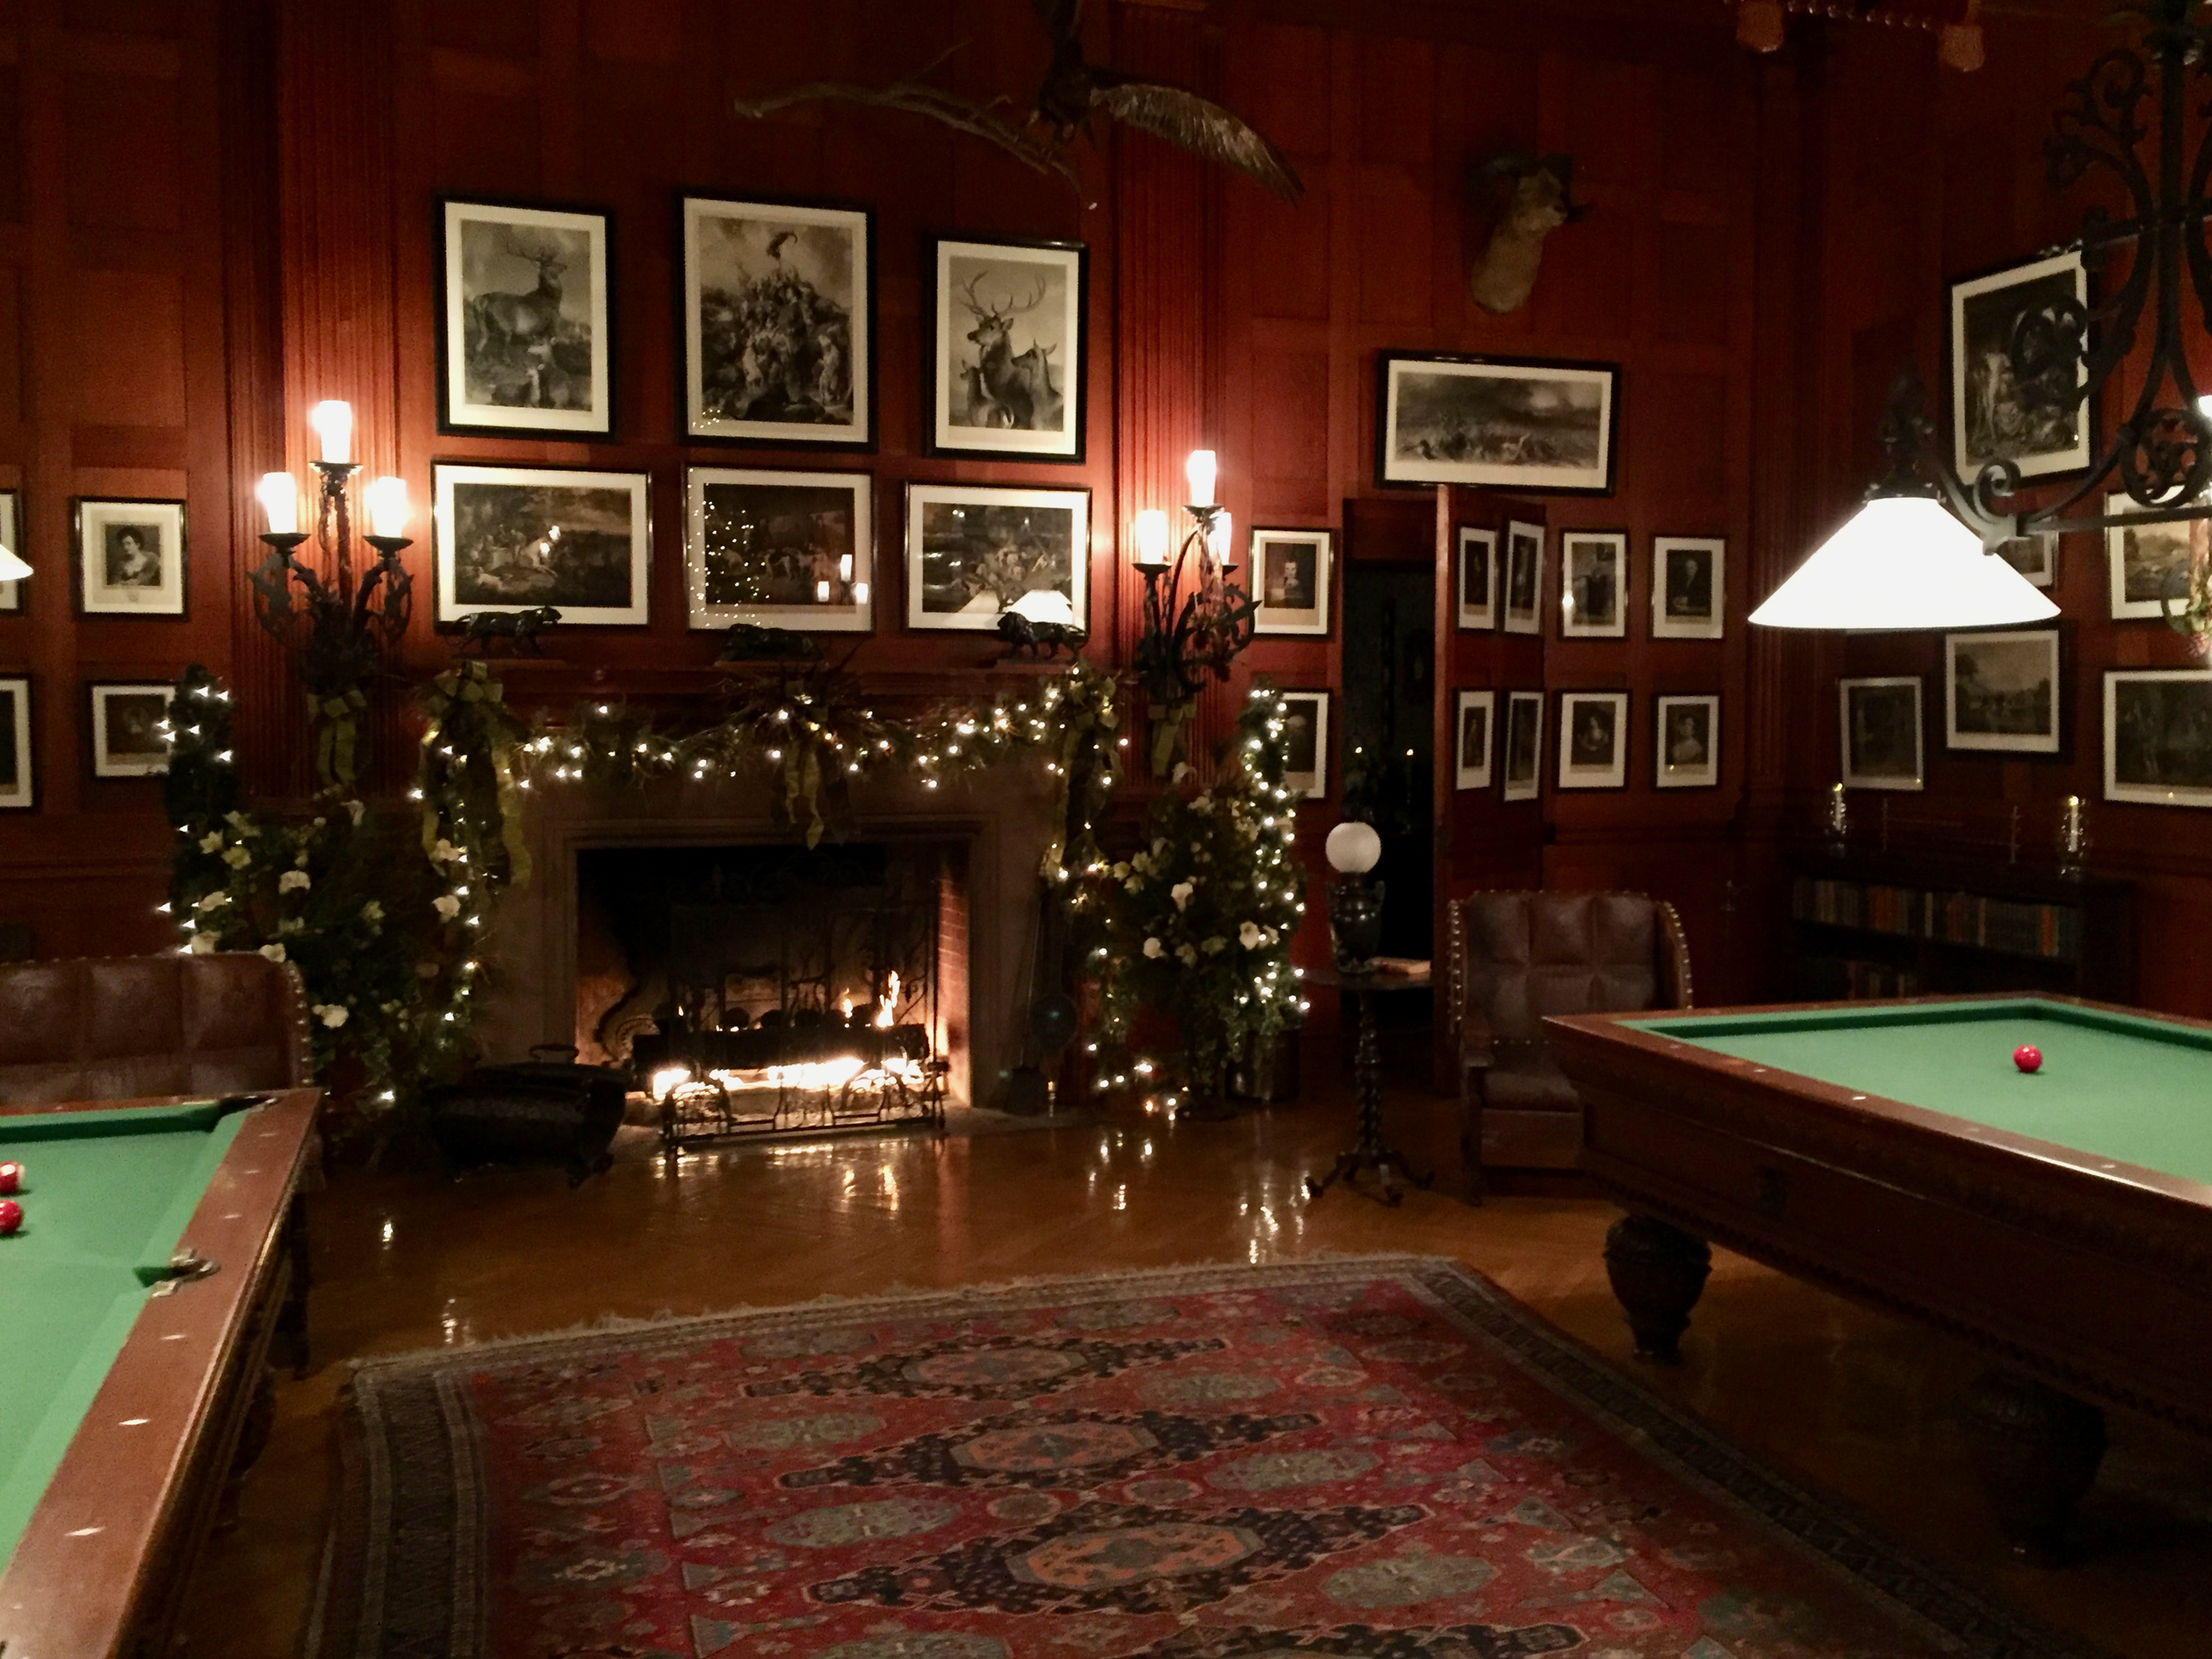 The billiards room decorated for the season